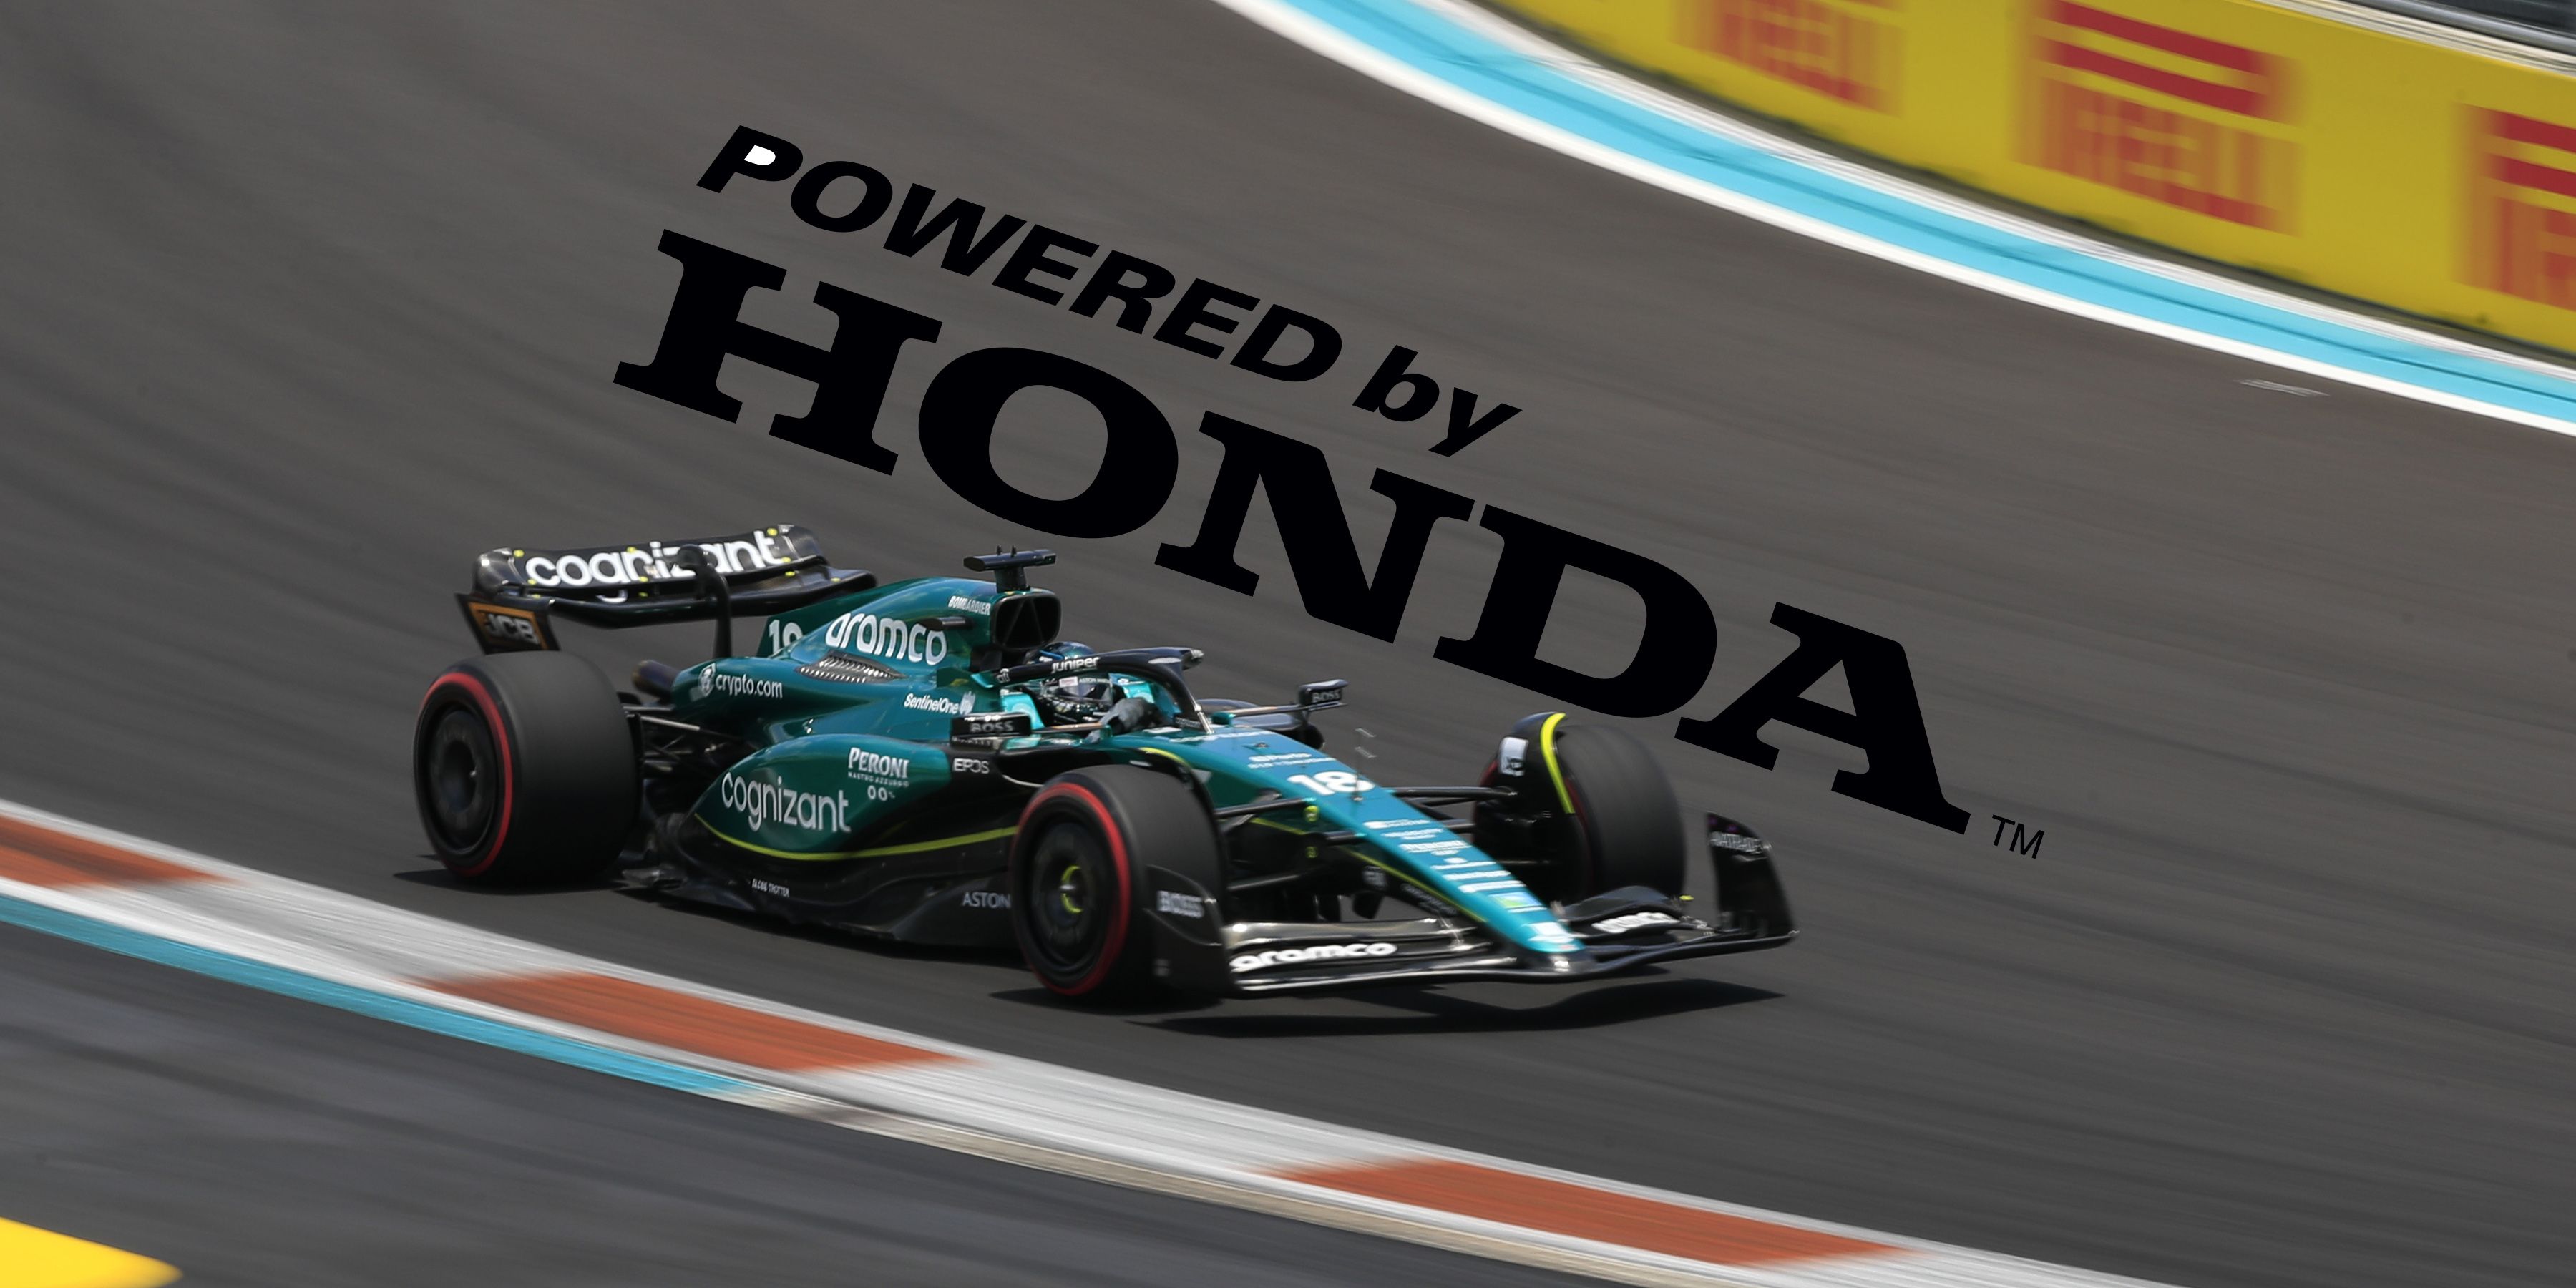 Honda Will Supply Engines for the Aston Martin Formula 1 Team From 2026